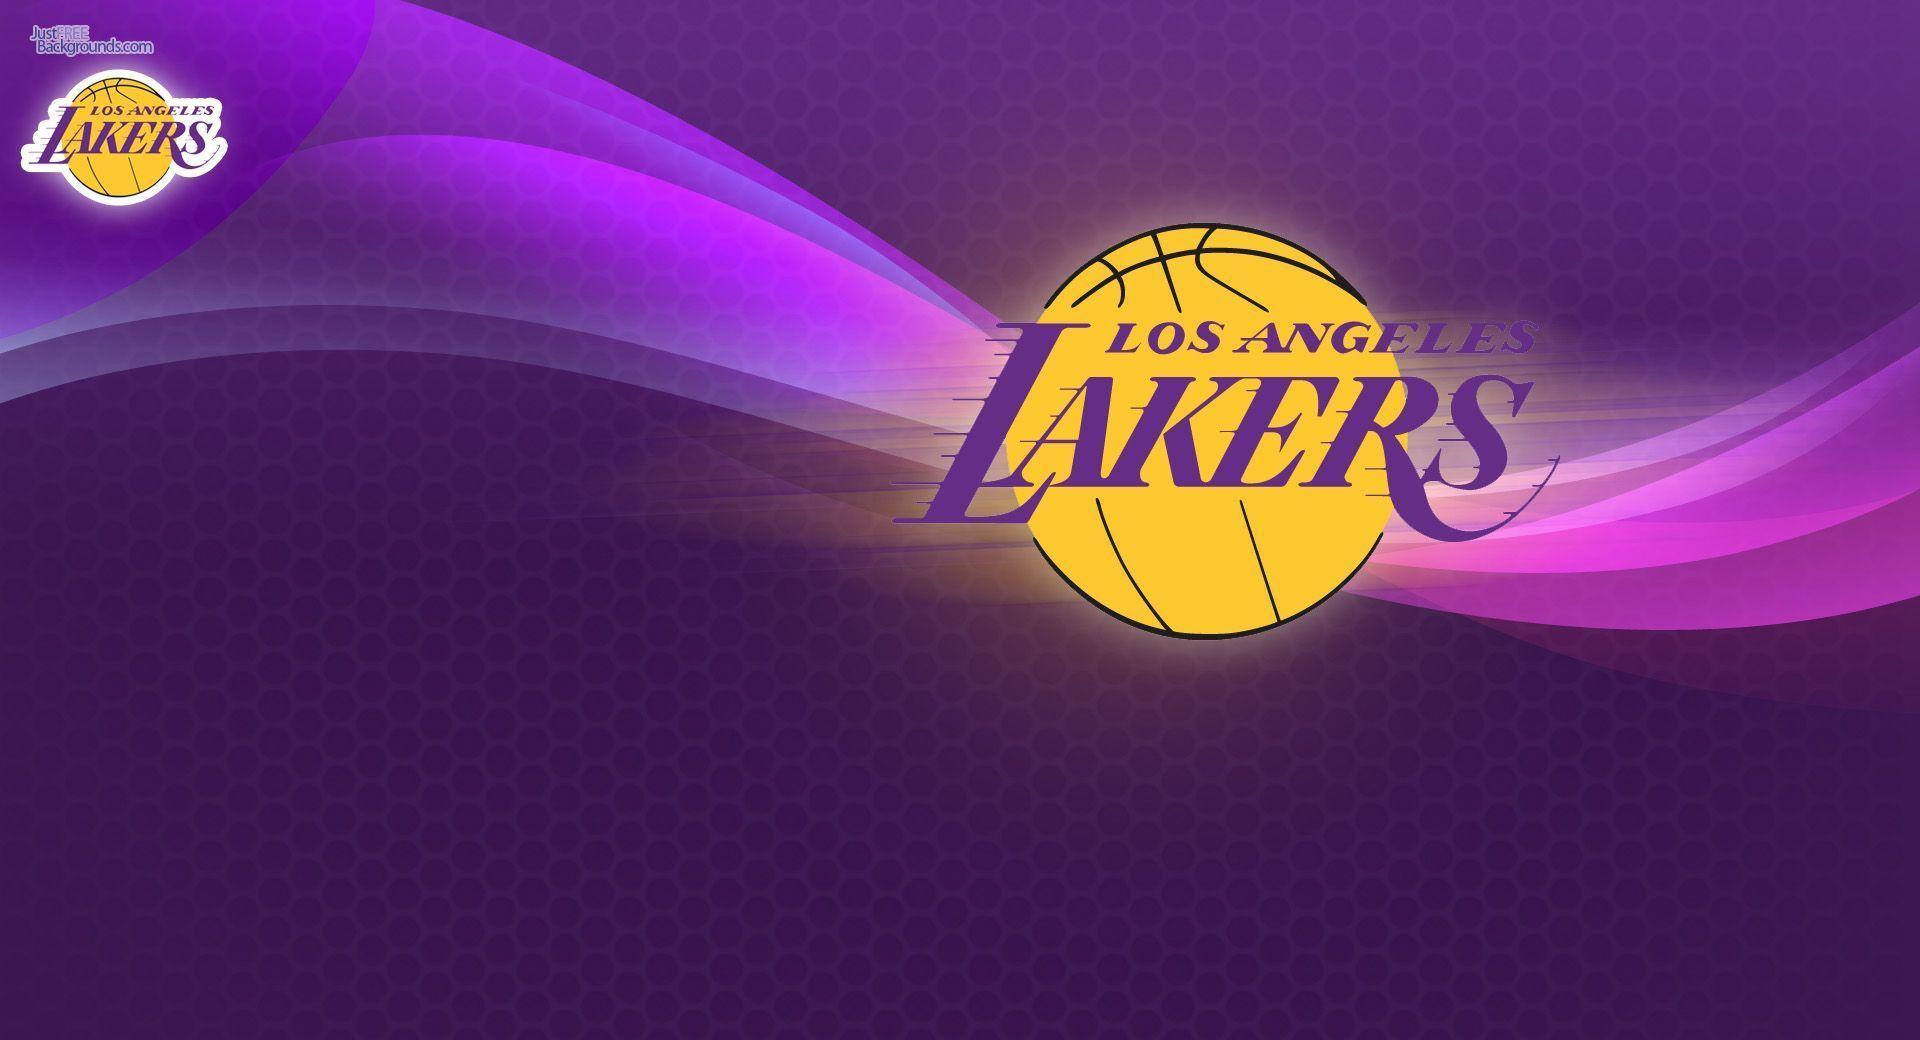 Enjoy this new Los Angeles Lakers desktop background. Escudo